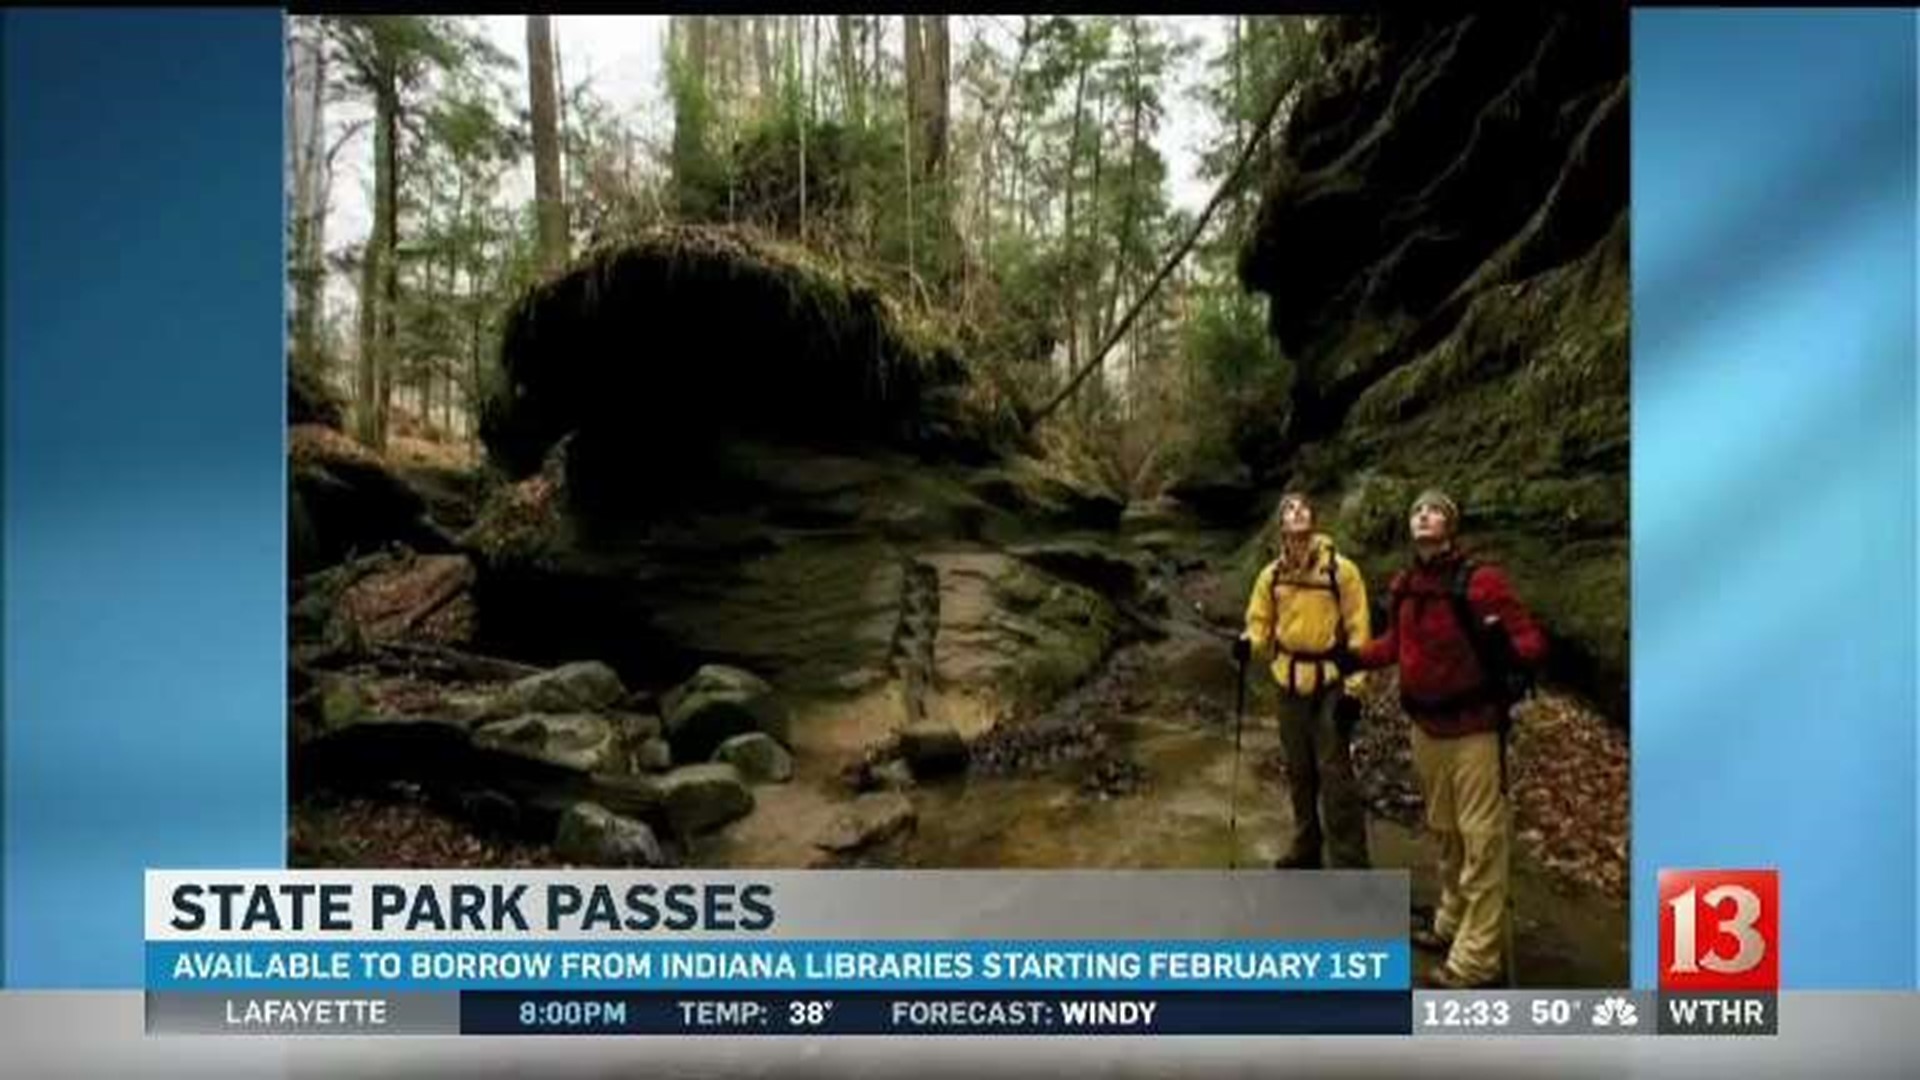 Indiana State Park passes available for checkout at your local library